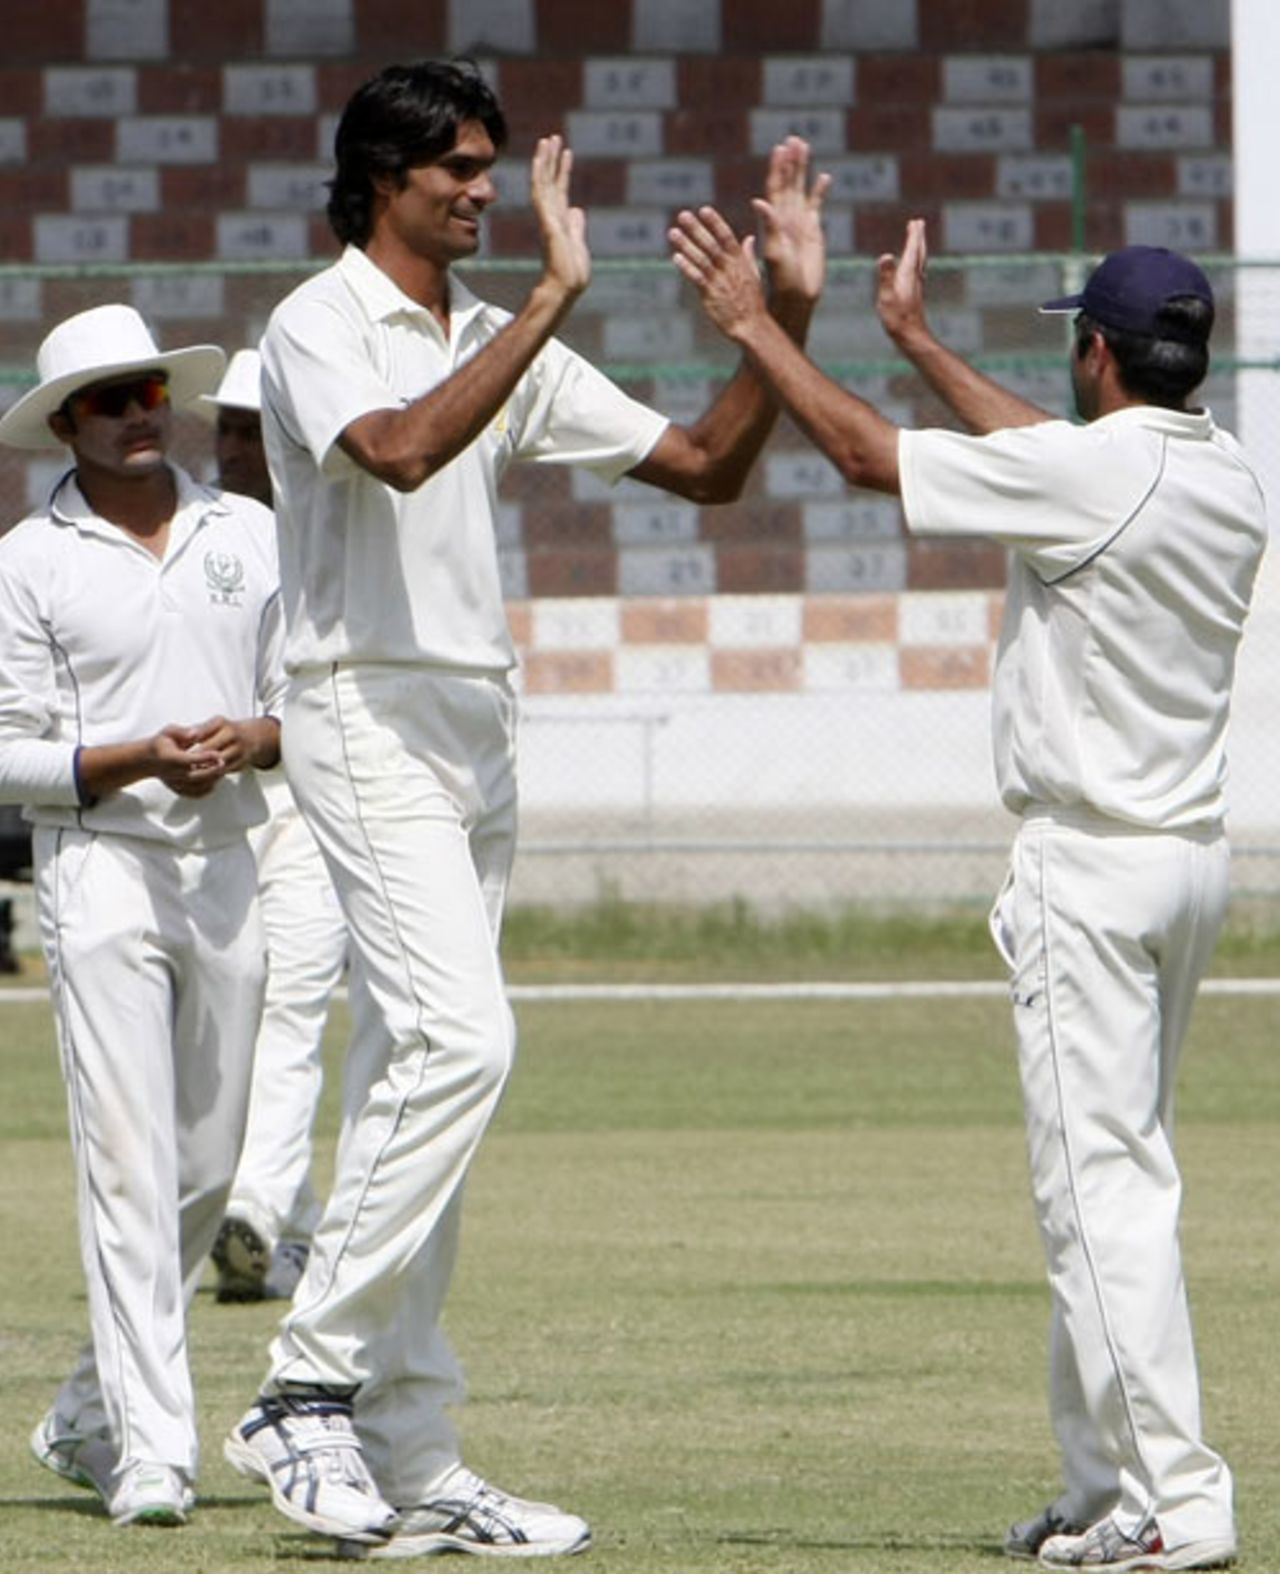 Mohammad Irfan is one of the tallest first-class cricketers from Pakistan, Habib Bank Limited v Khan Research Laboratories, Quaid-e-Azam Trophy, Karachi, 3rd day, October 18, 2009